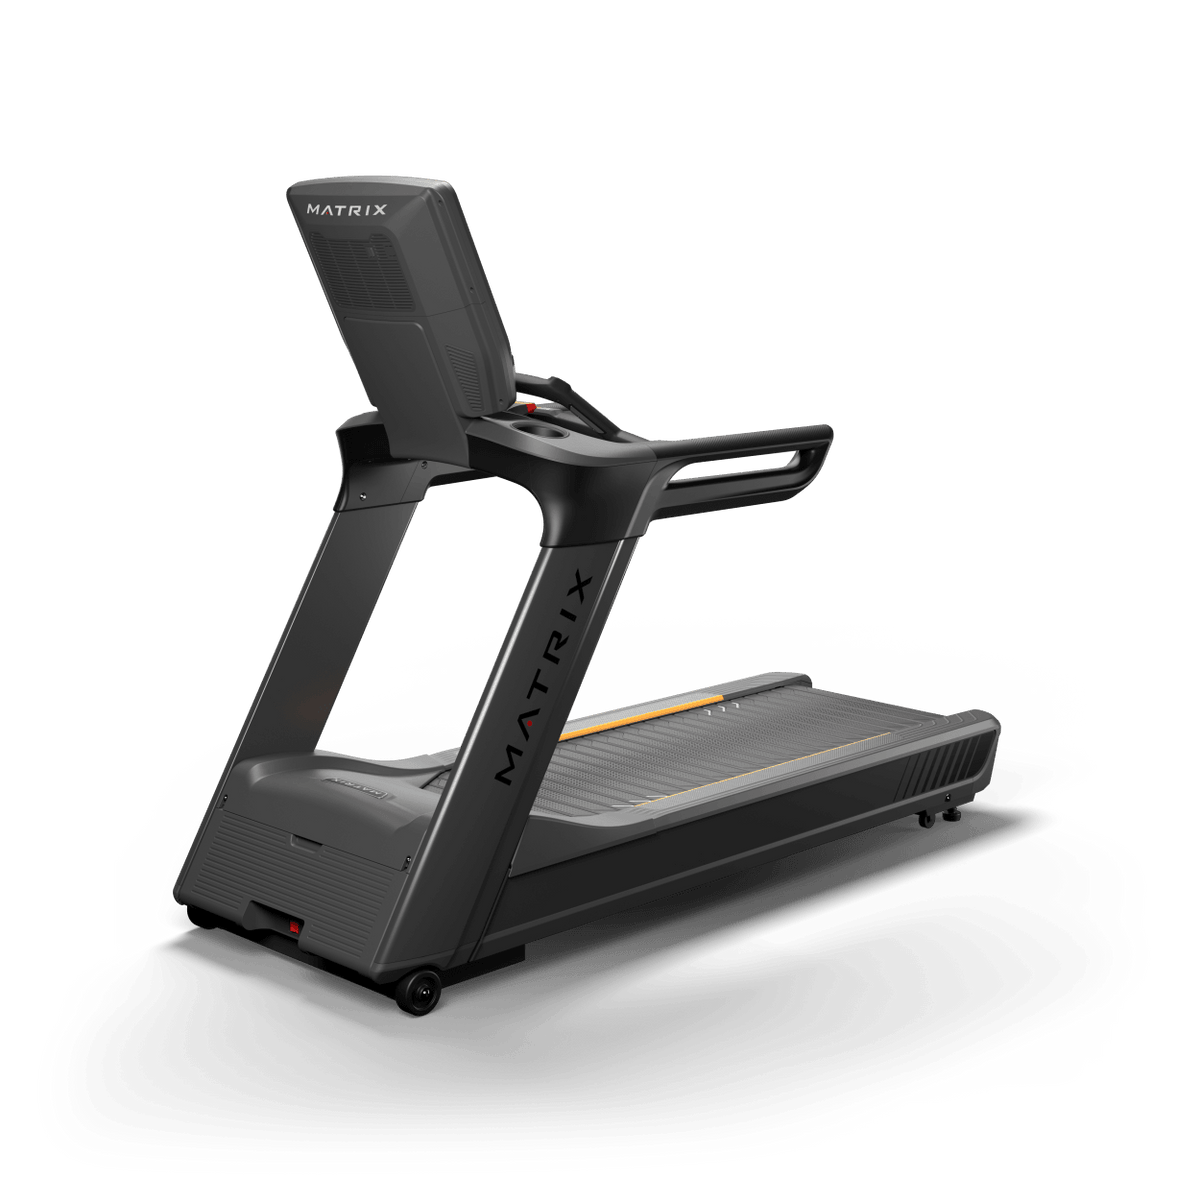 Matrix Performance Plus Treadmill with Touch XL Console rear view | Fitness Experience 